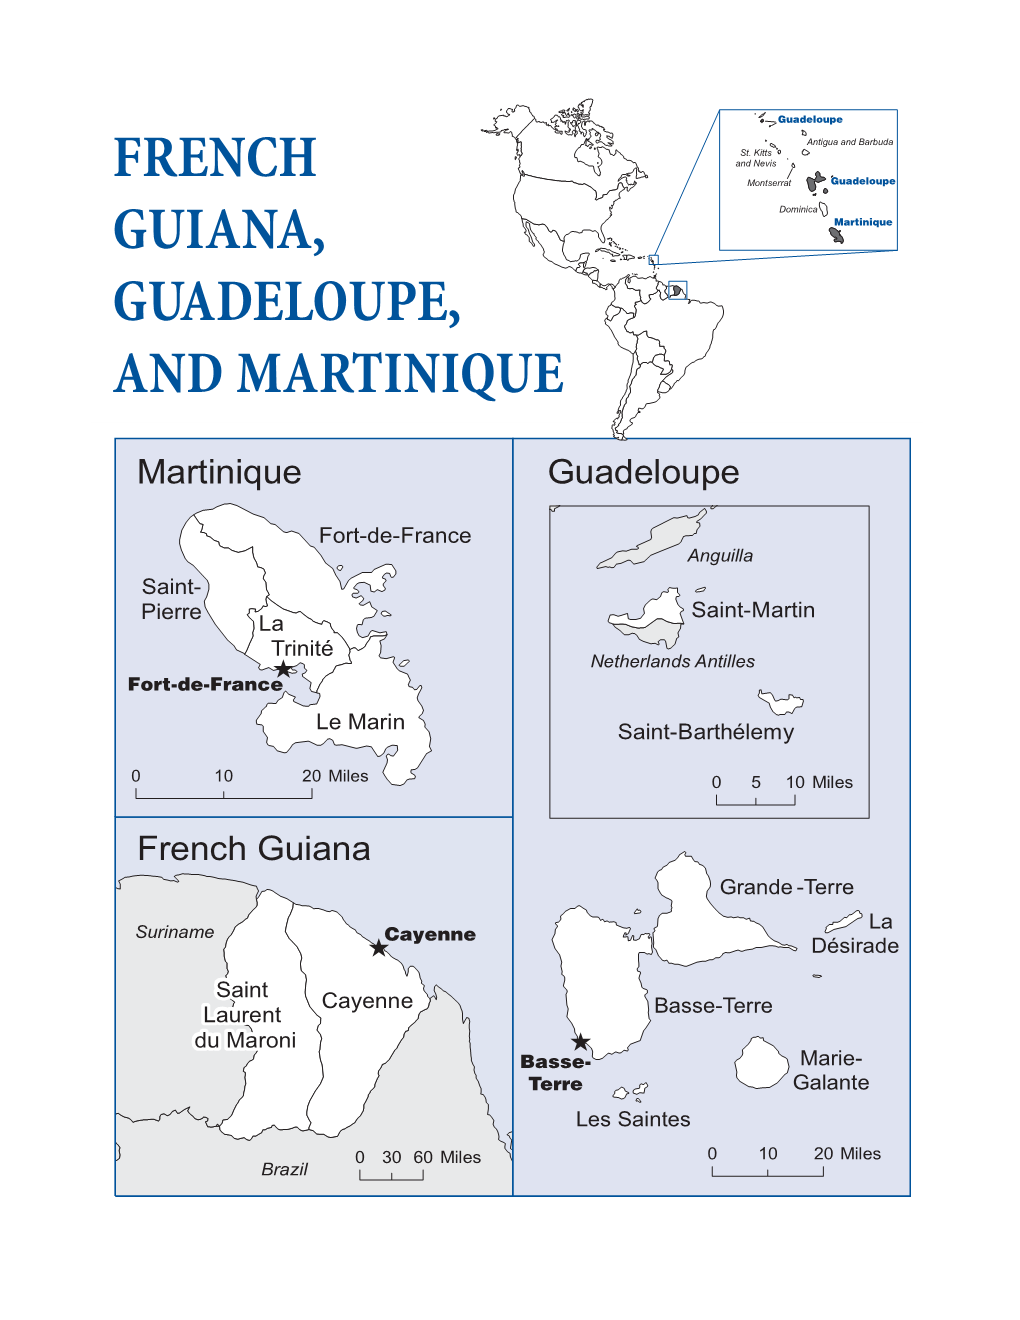 French Guiana, Guadeloupe, and Martinique